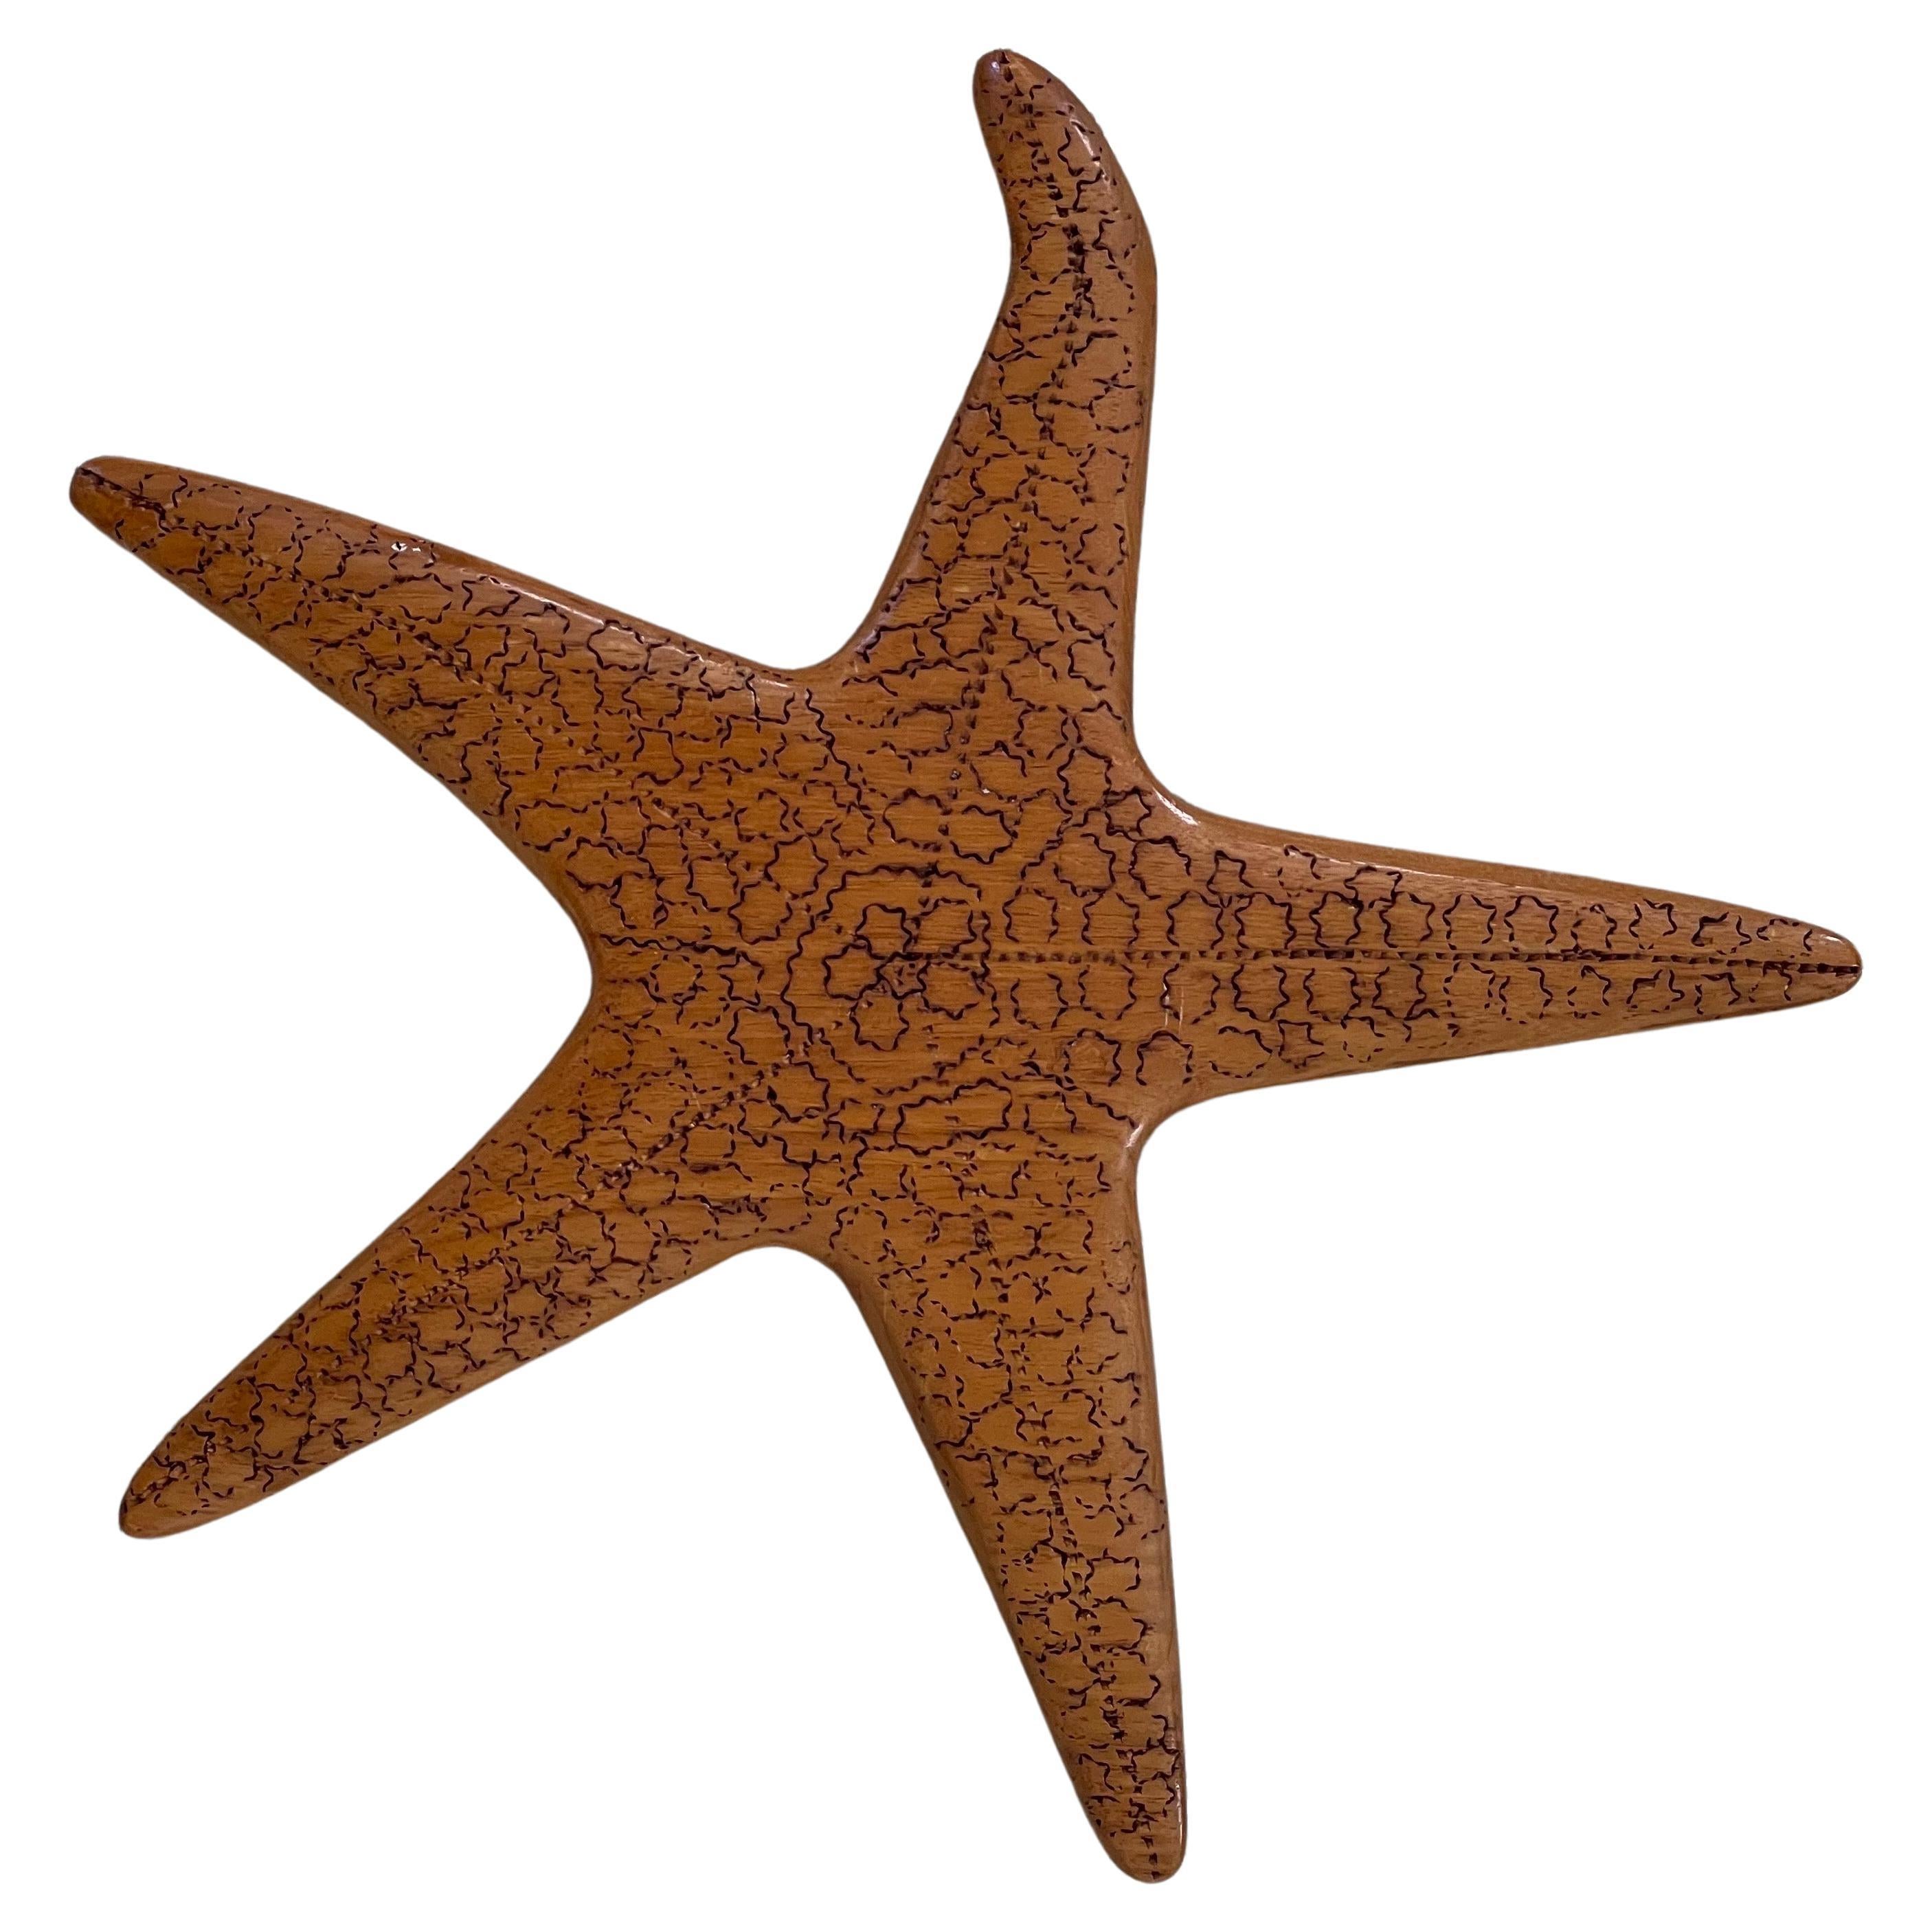 A fun vintage carved wood starfish wall hanging sculpture, circa 1970s. This piece is in very good vintage condition and measures 14.5